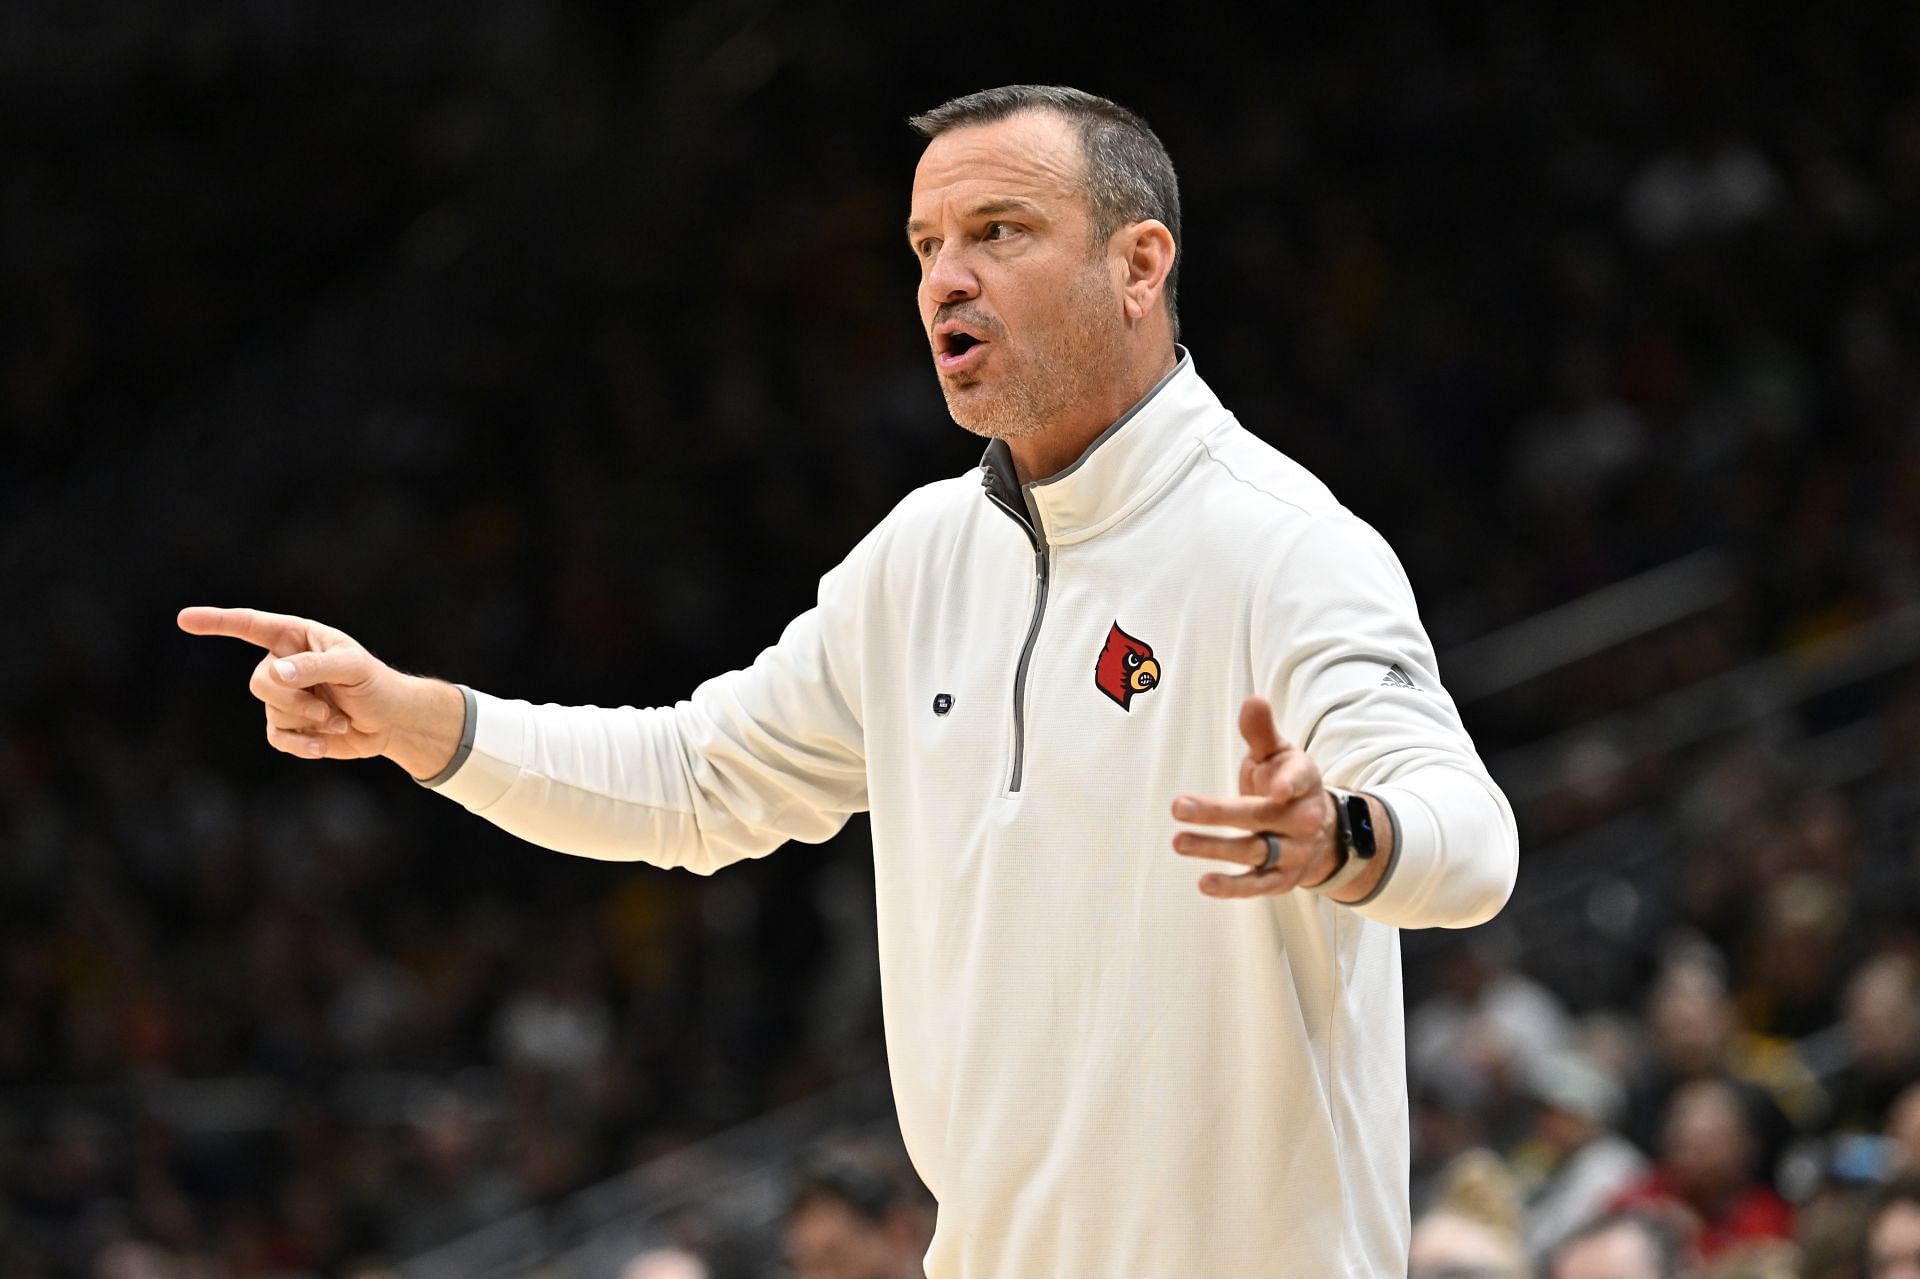 Louisville and coach Jeff Waltz have had a disappointing season.